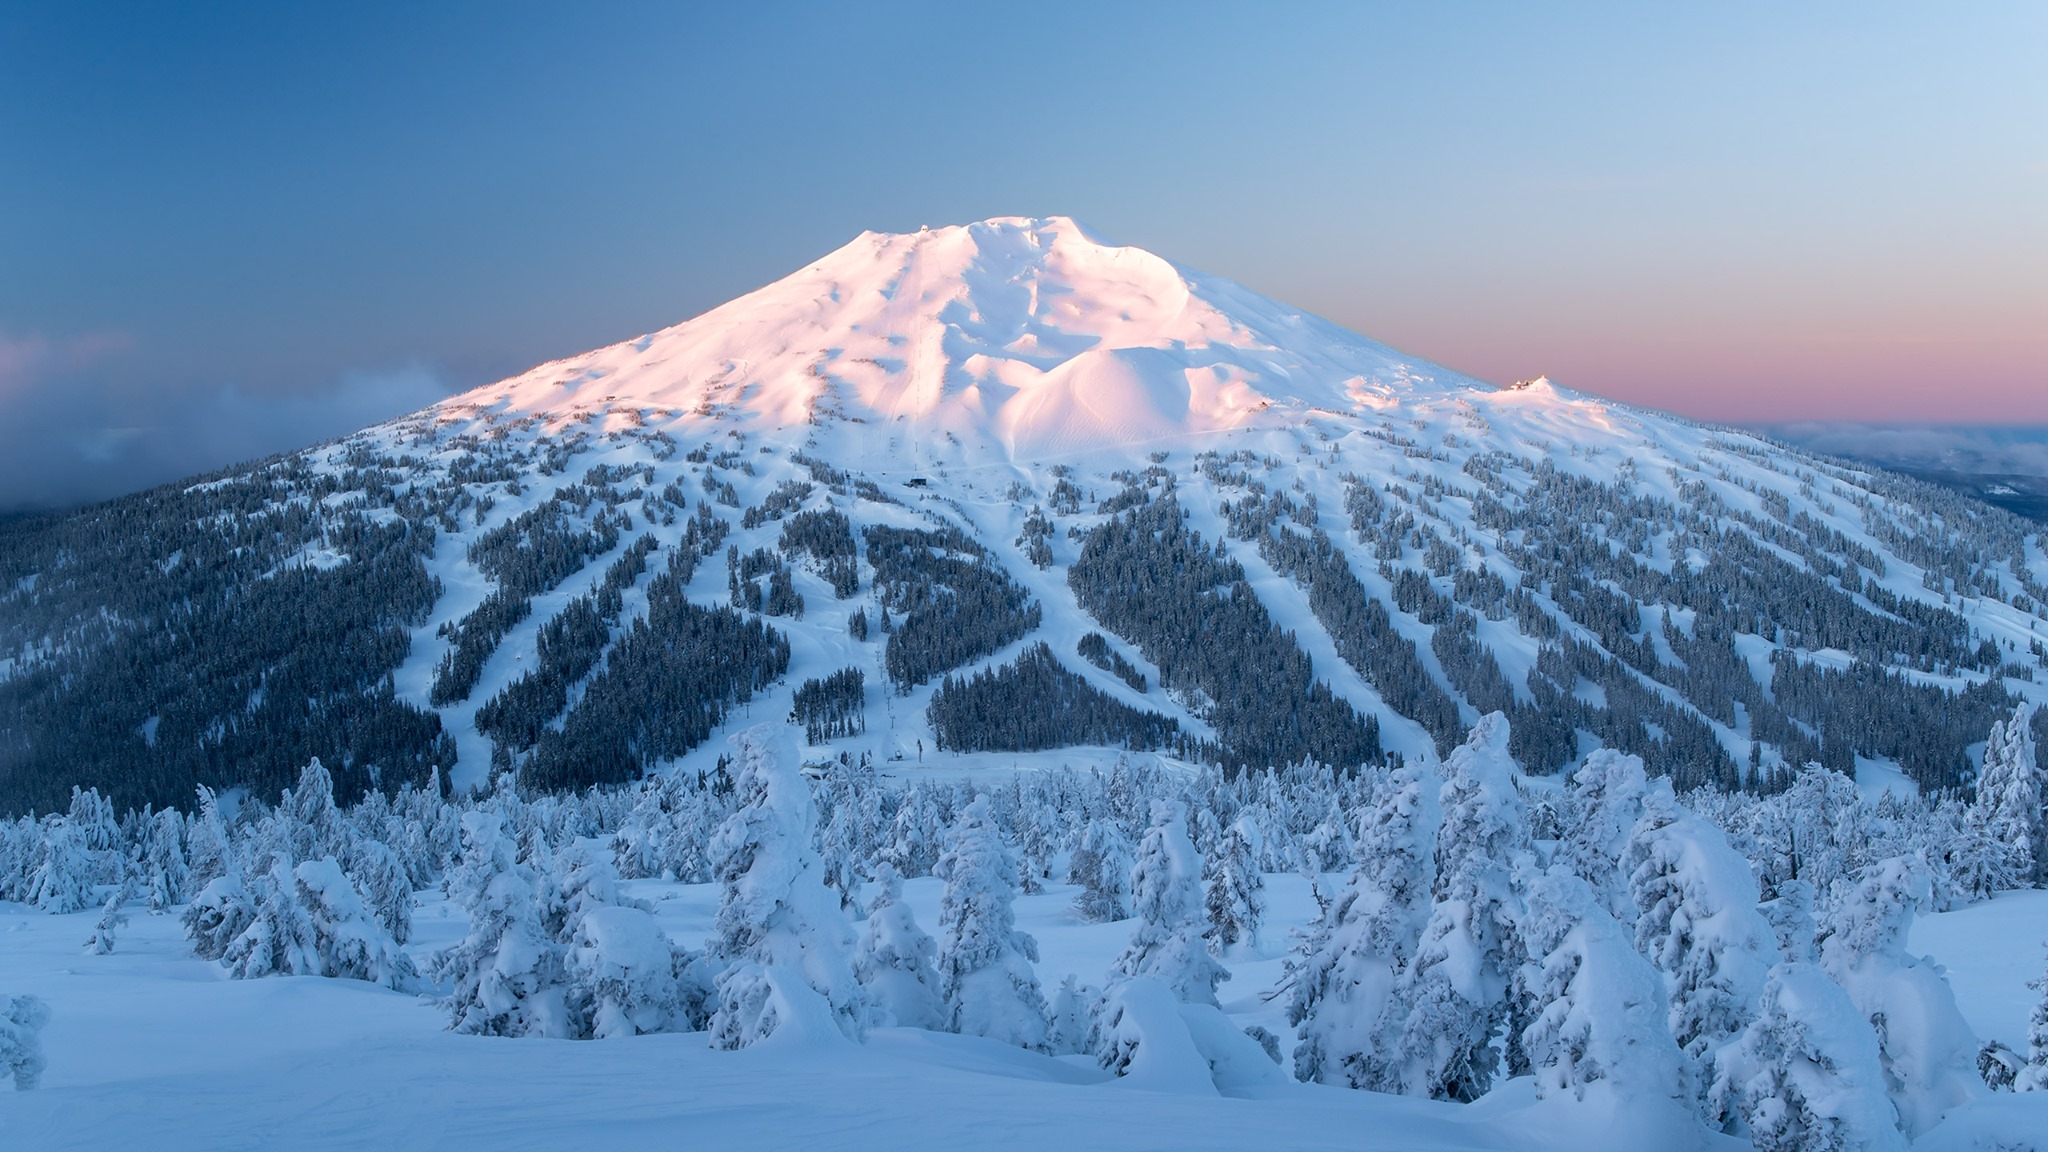 Mt. Bachelor To Offer Cheaper Lift Tickets For Signing Liability Waiver, Oregon